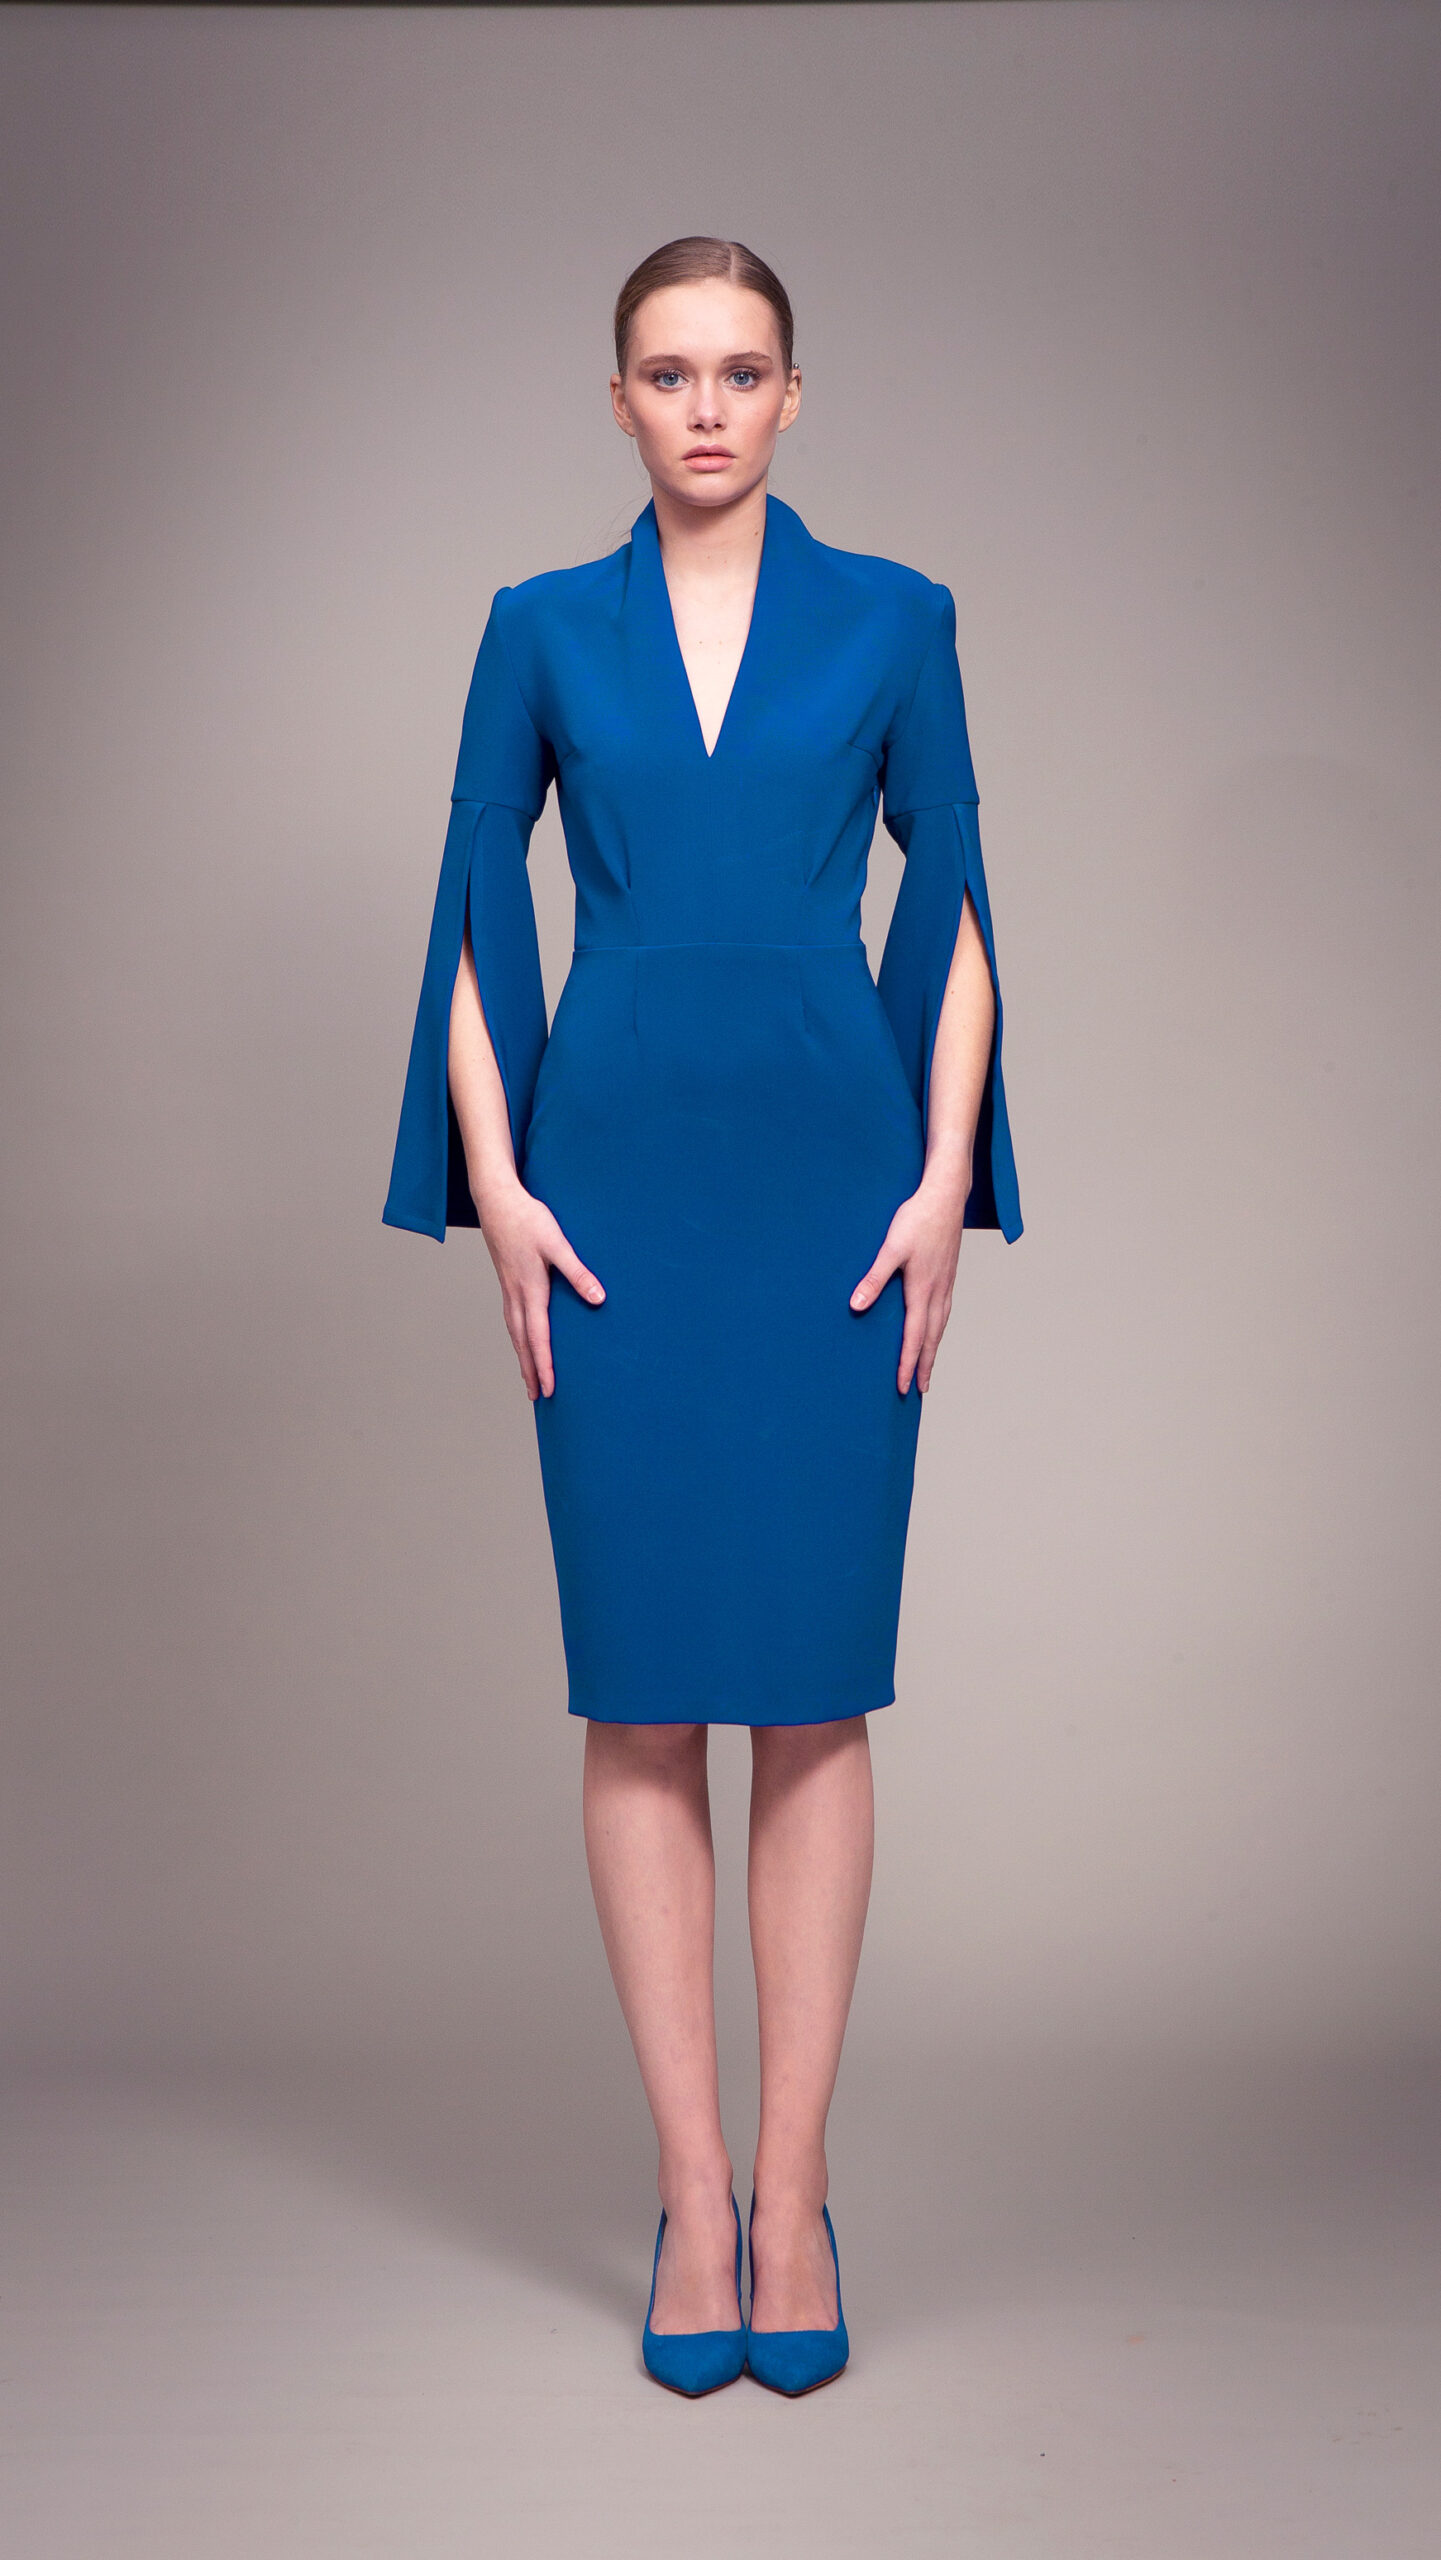 Mariell Dress in Various Colours – Riina Põldroos